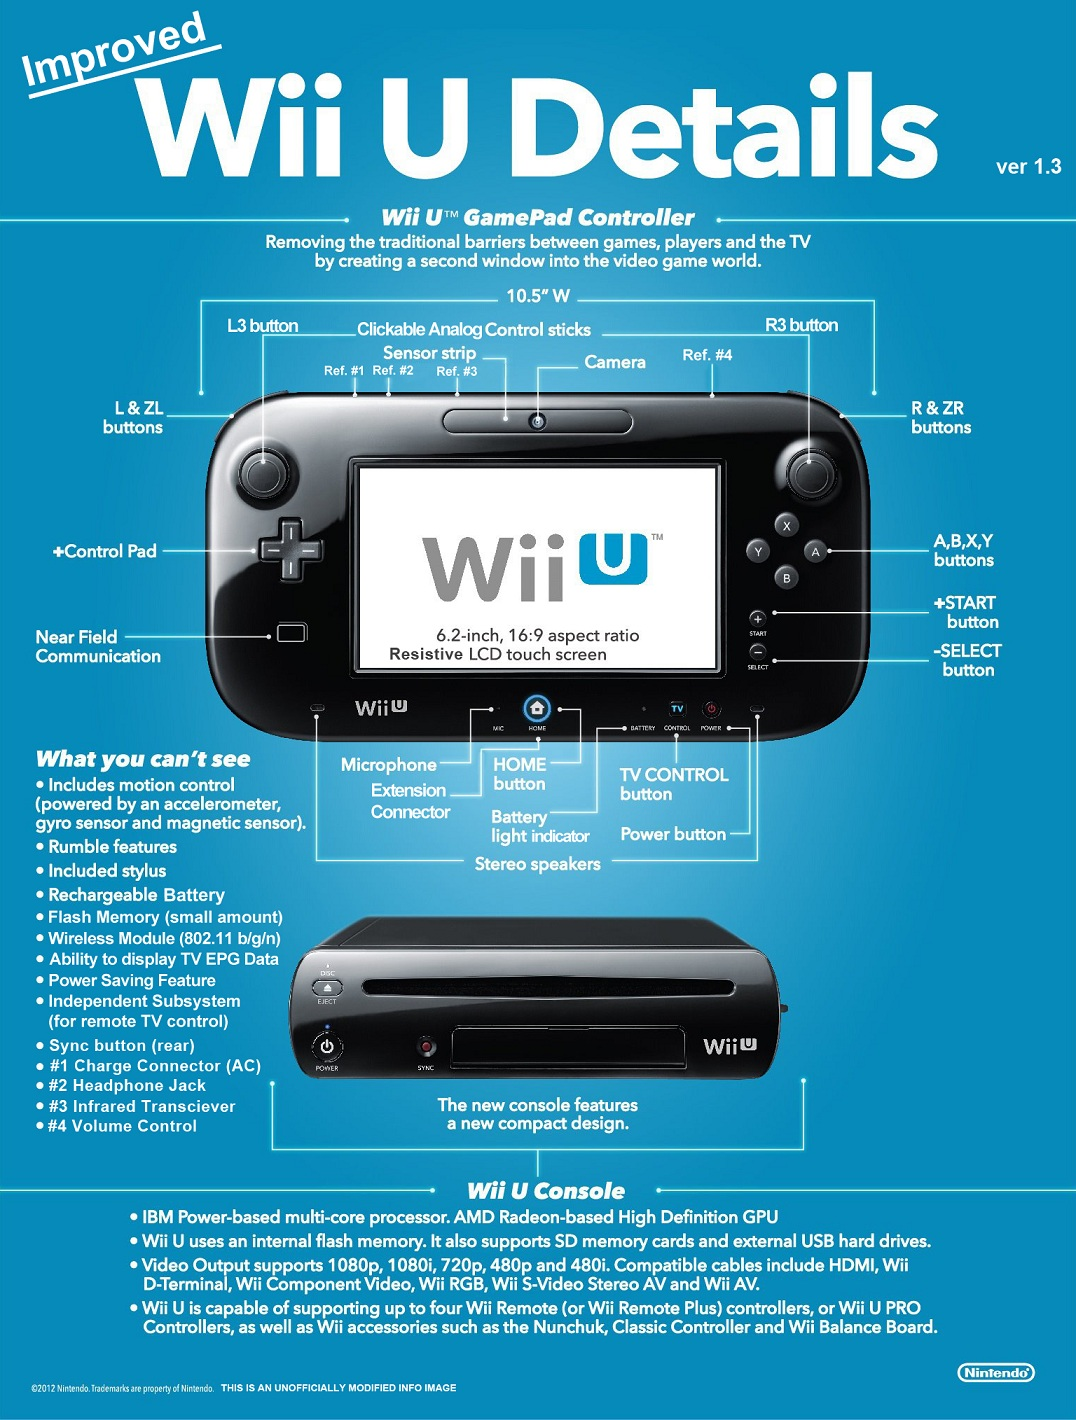 weerstand kwaad strelen Everything you need know about the Wii U | Ars Technica